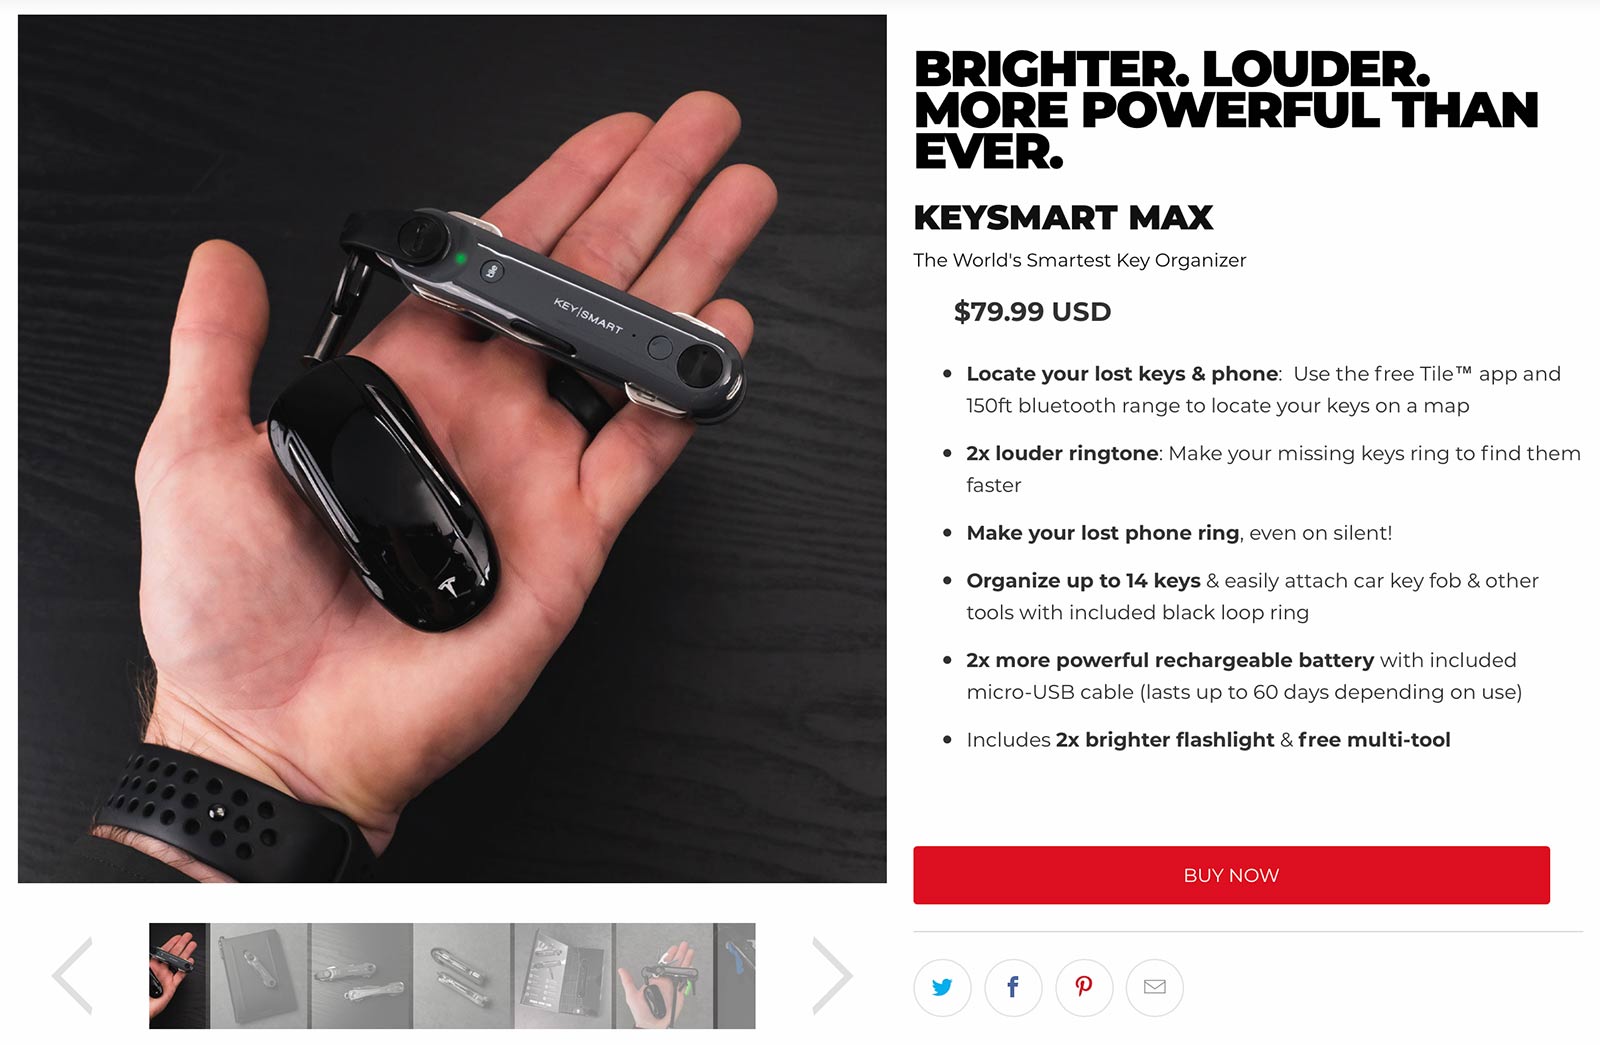 Keysmart product page with image and bullet points